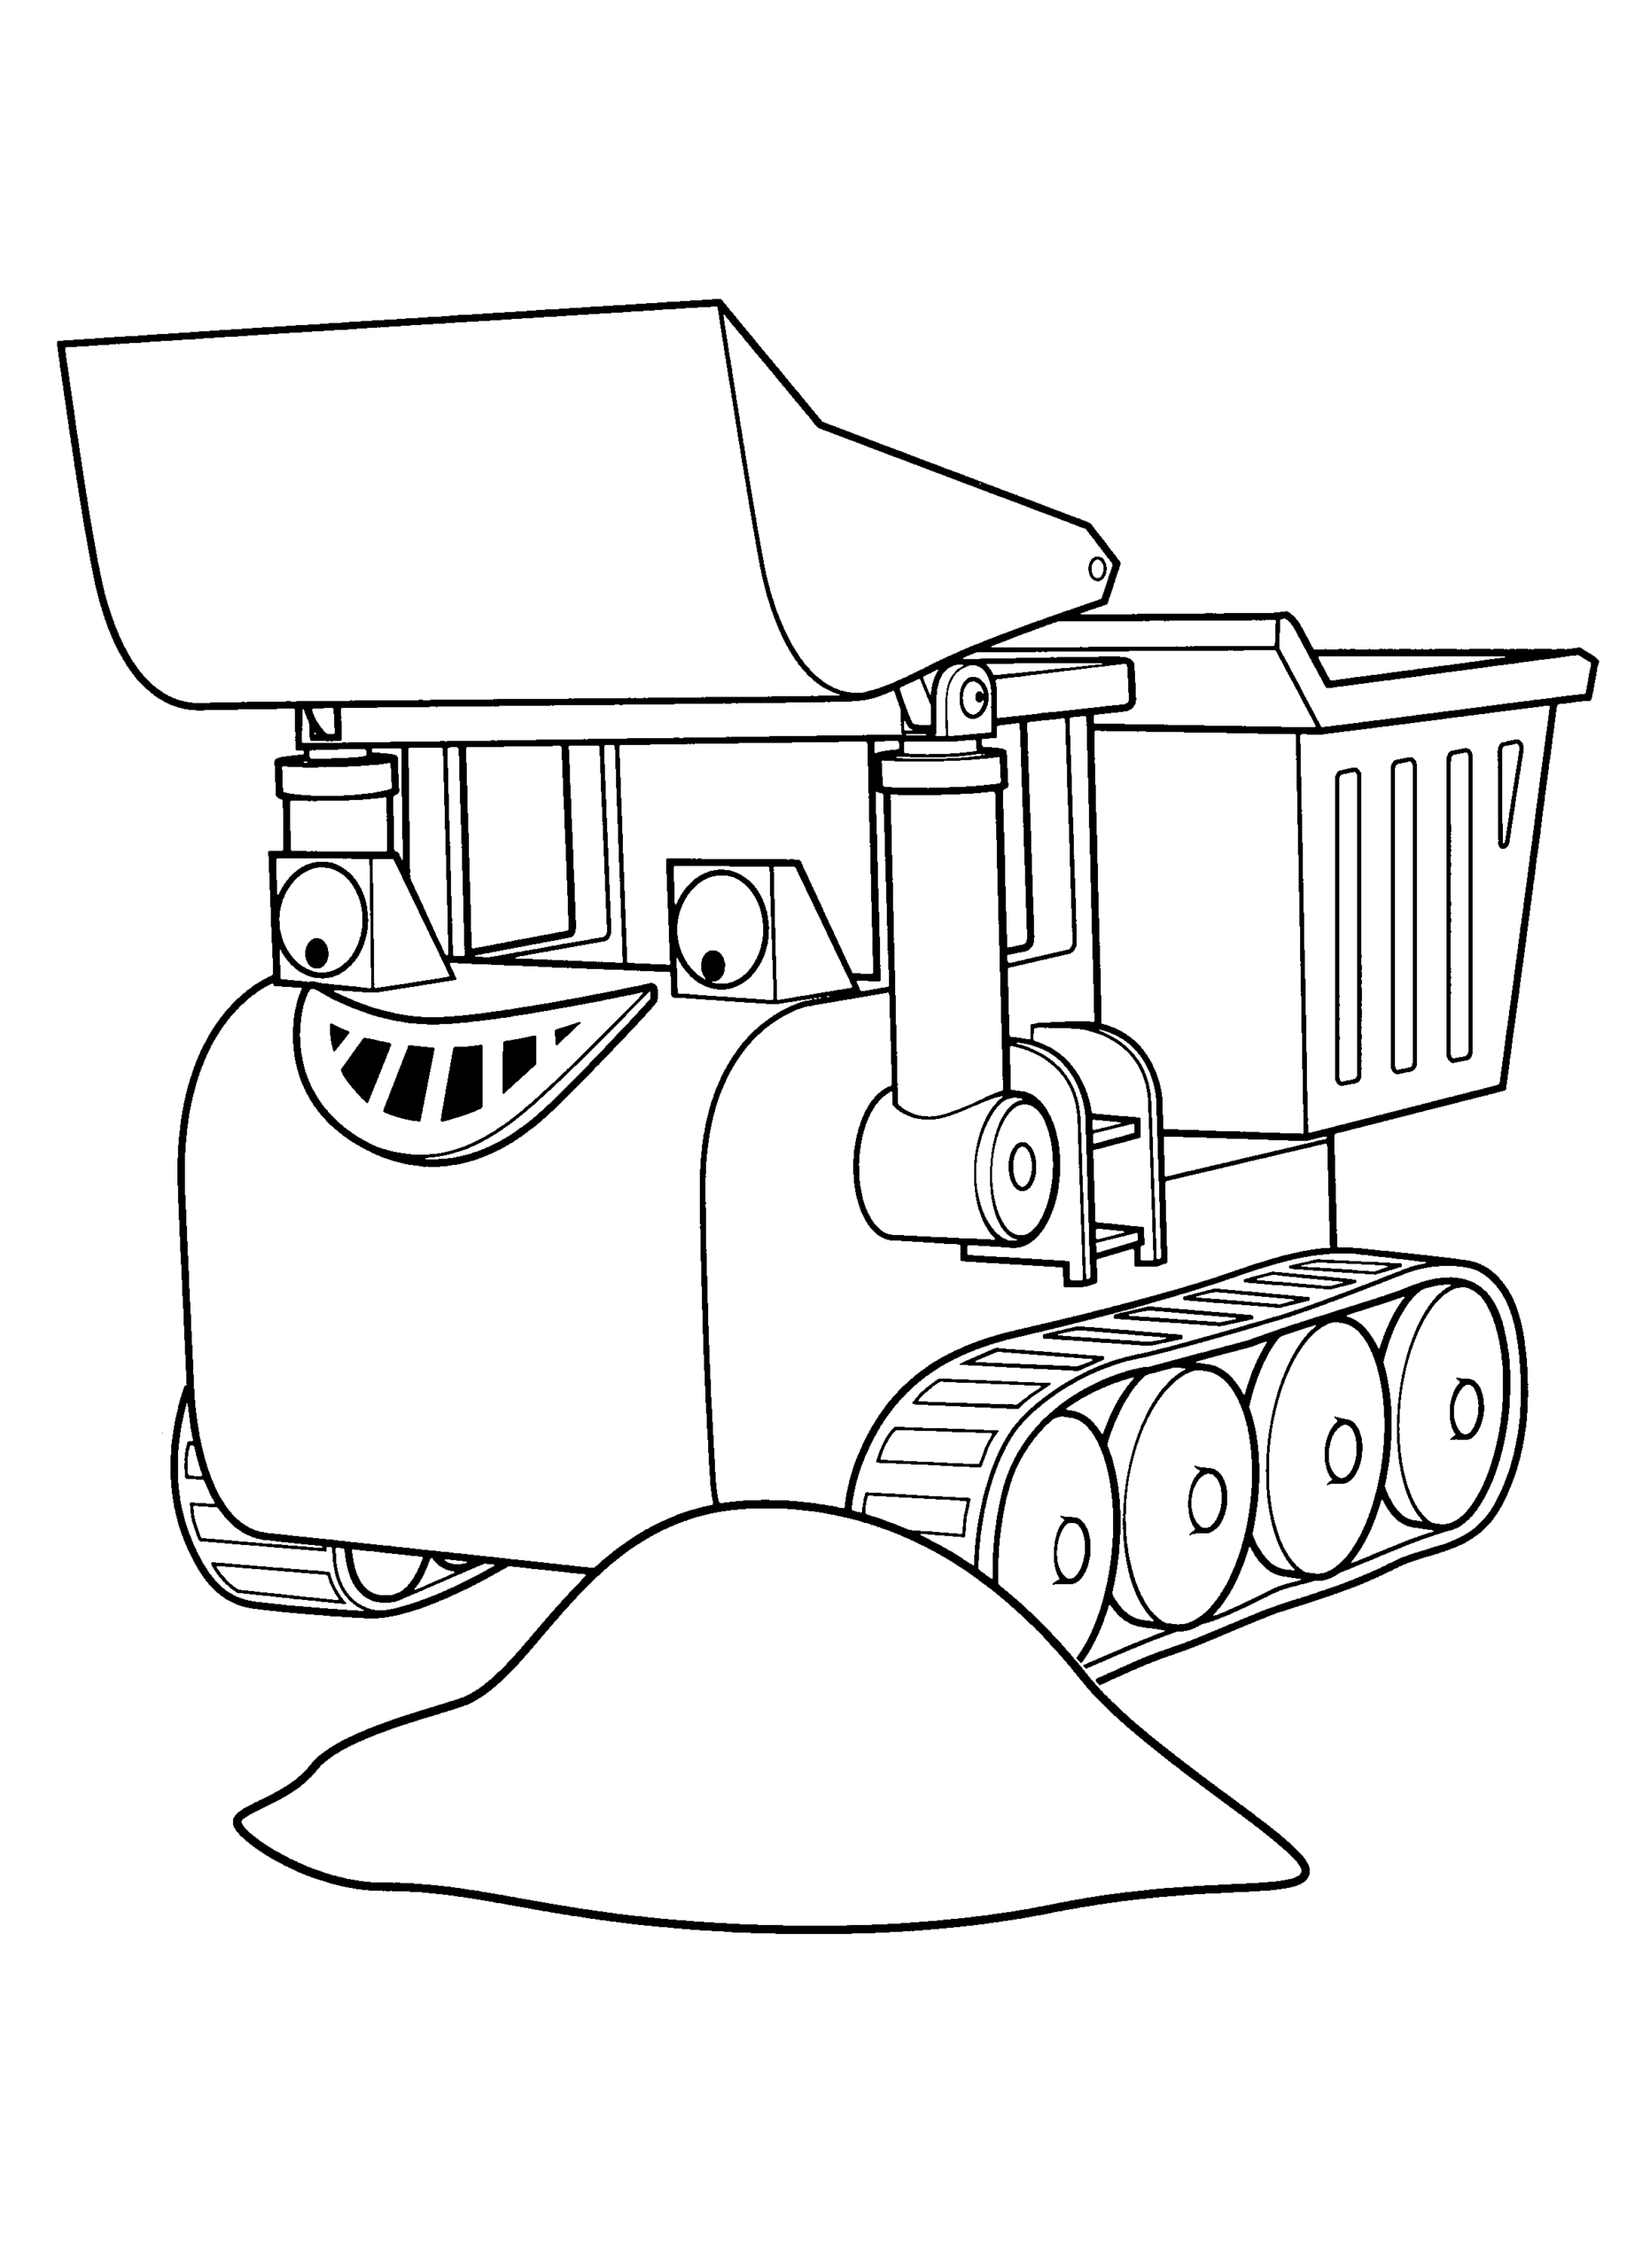 Bob the Builder Coloring Pages TV Film bob the builder 16 Printable 2020 01027 Coloring4free